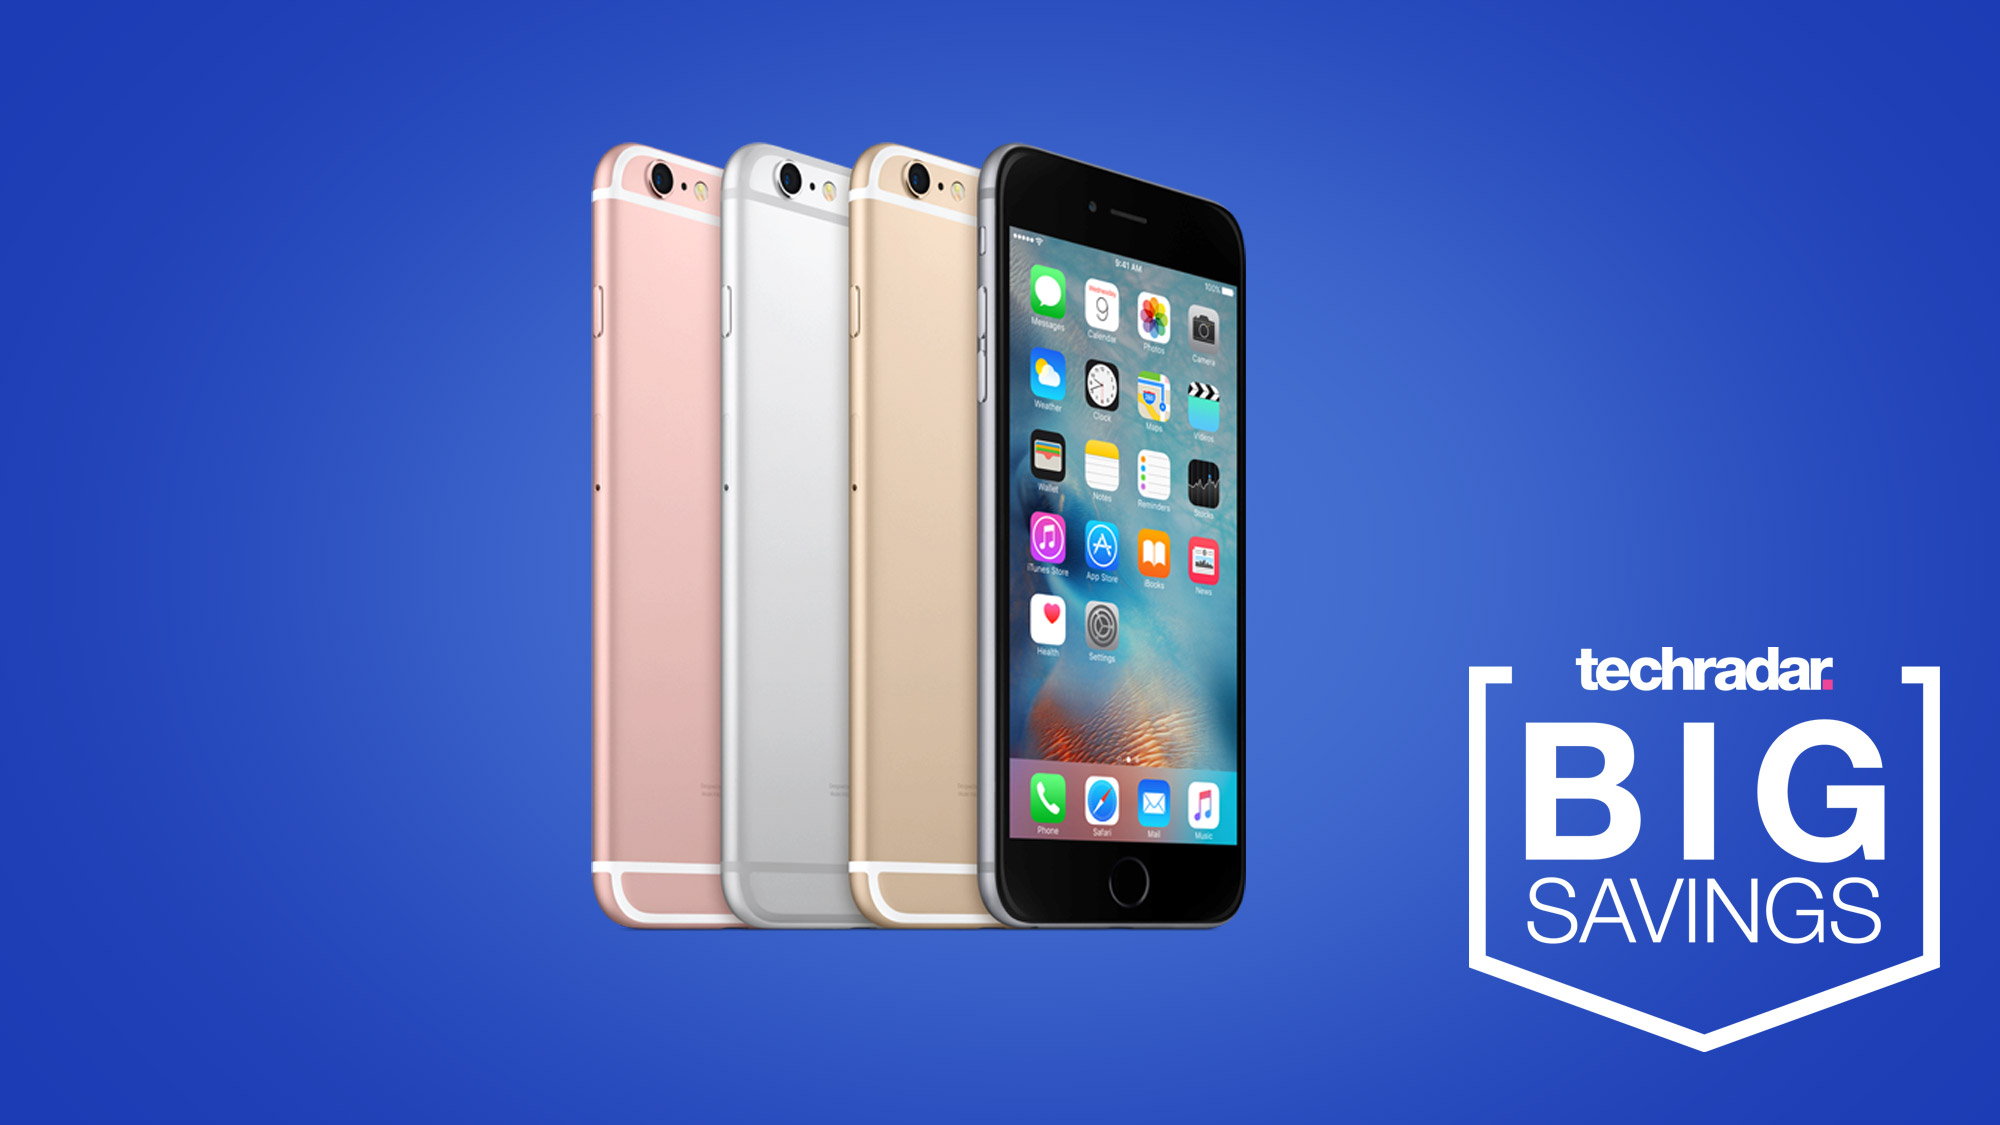 Iphone Deal Alert Get The Iphone 6s For Only 99 99 At Sprint